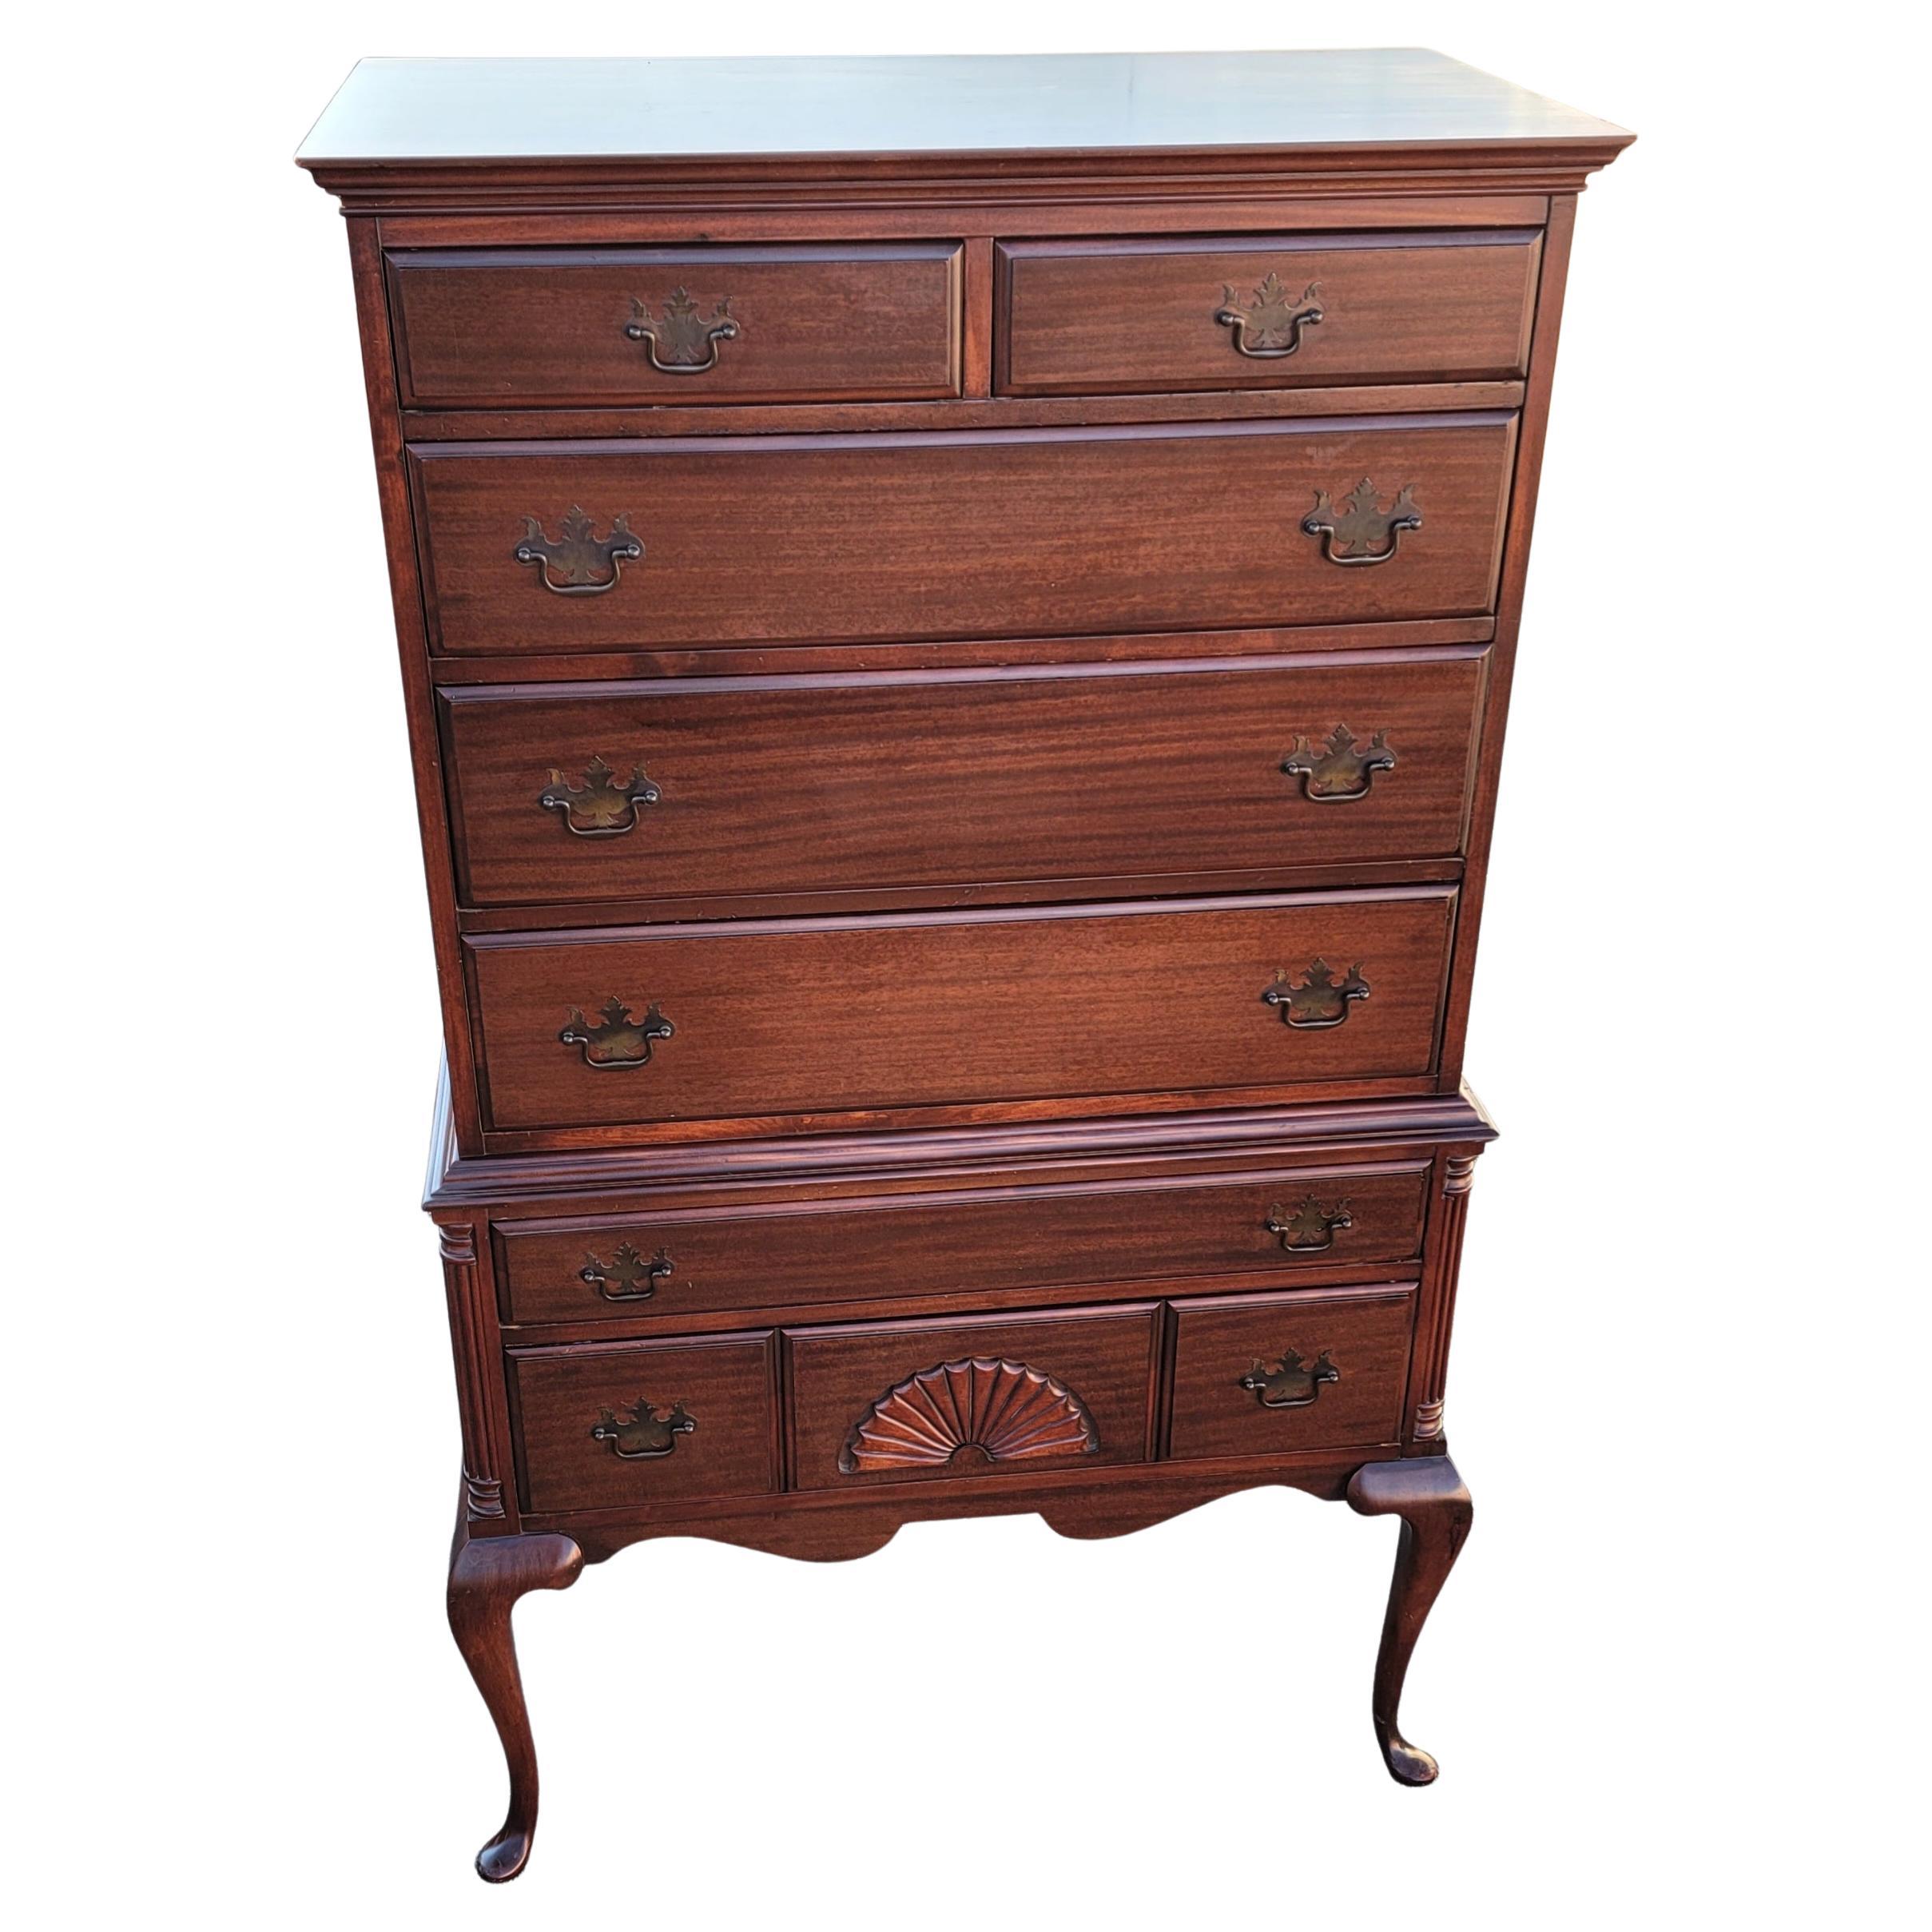 Early 1900's Chippendale Mahogany Highboy Chest of Drawers In Good Condition For Sale In Germantown, MD